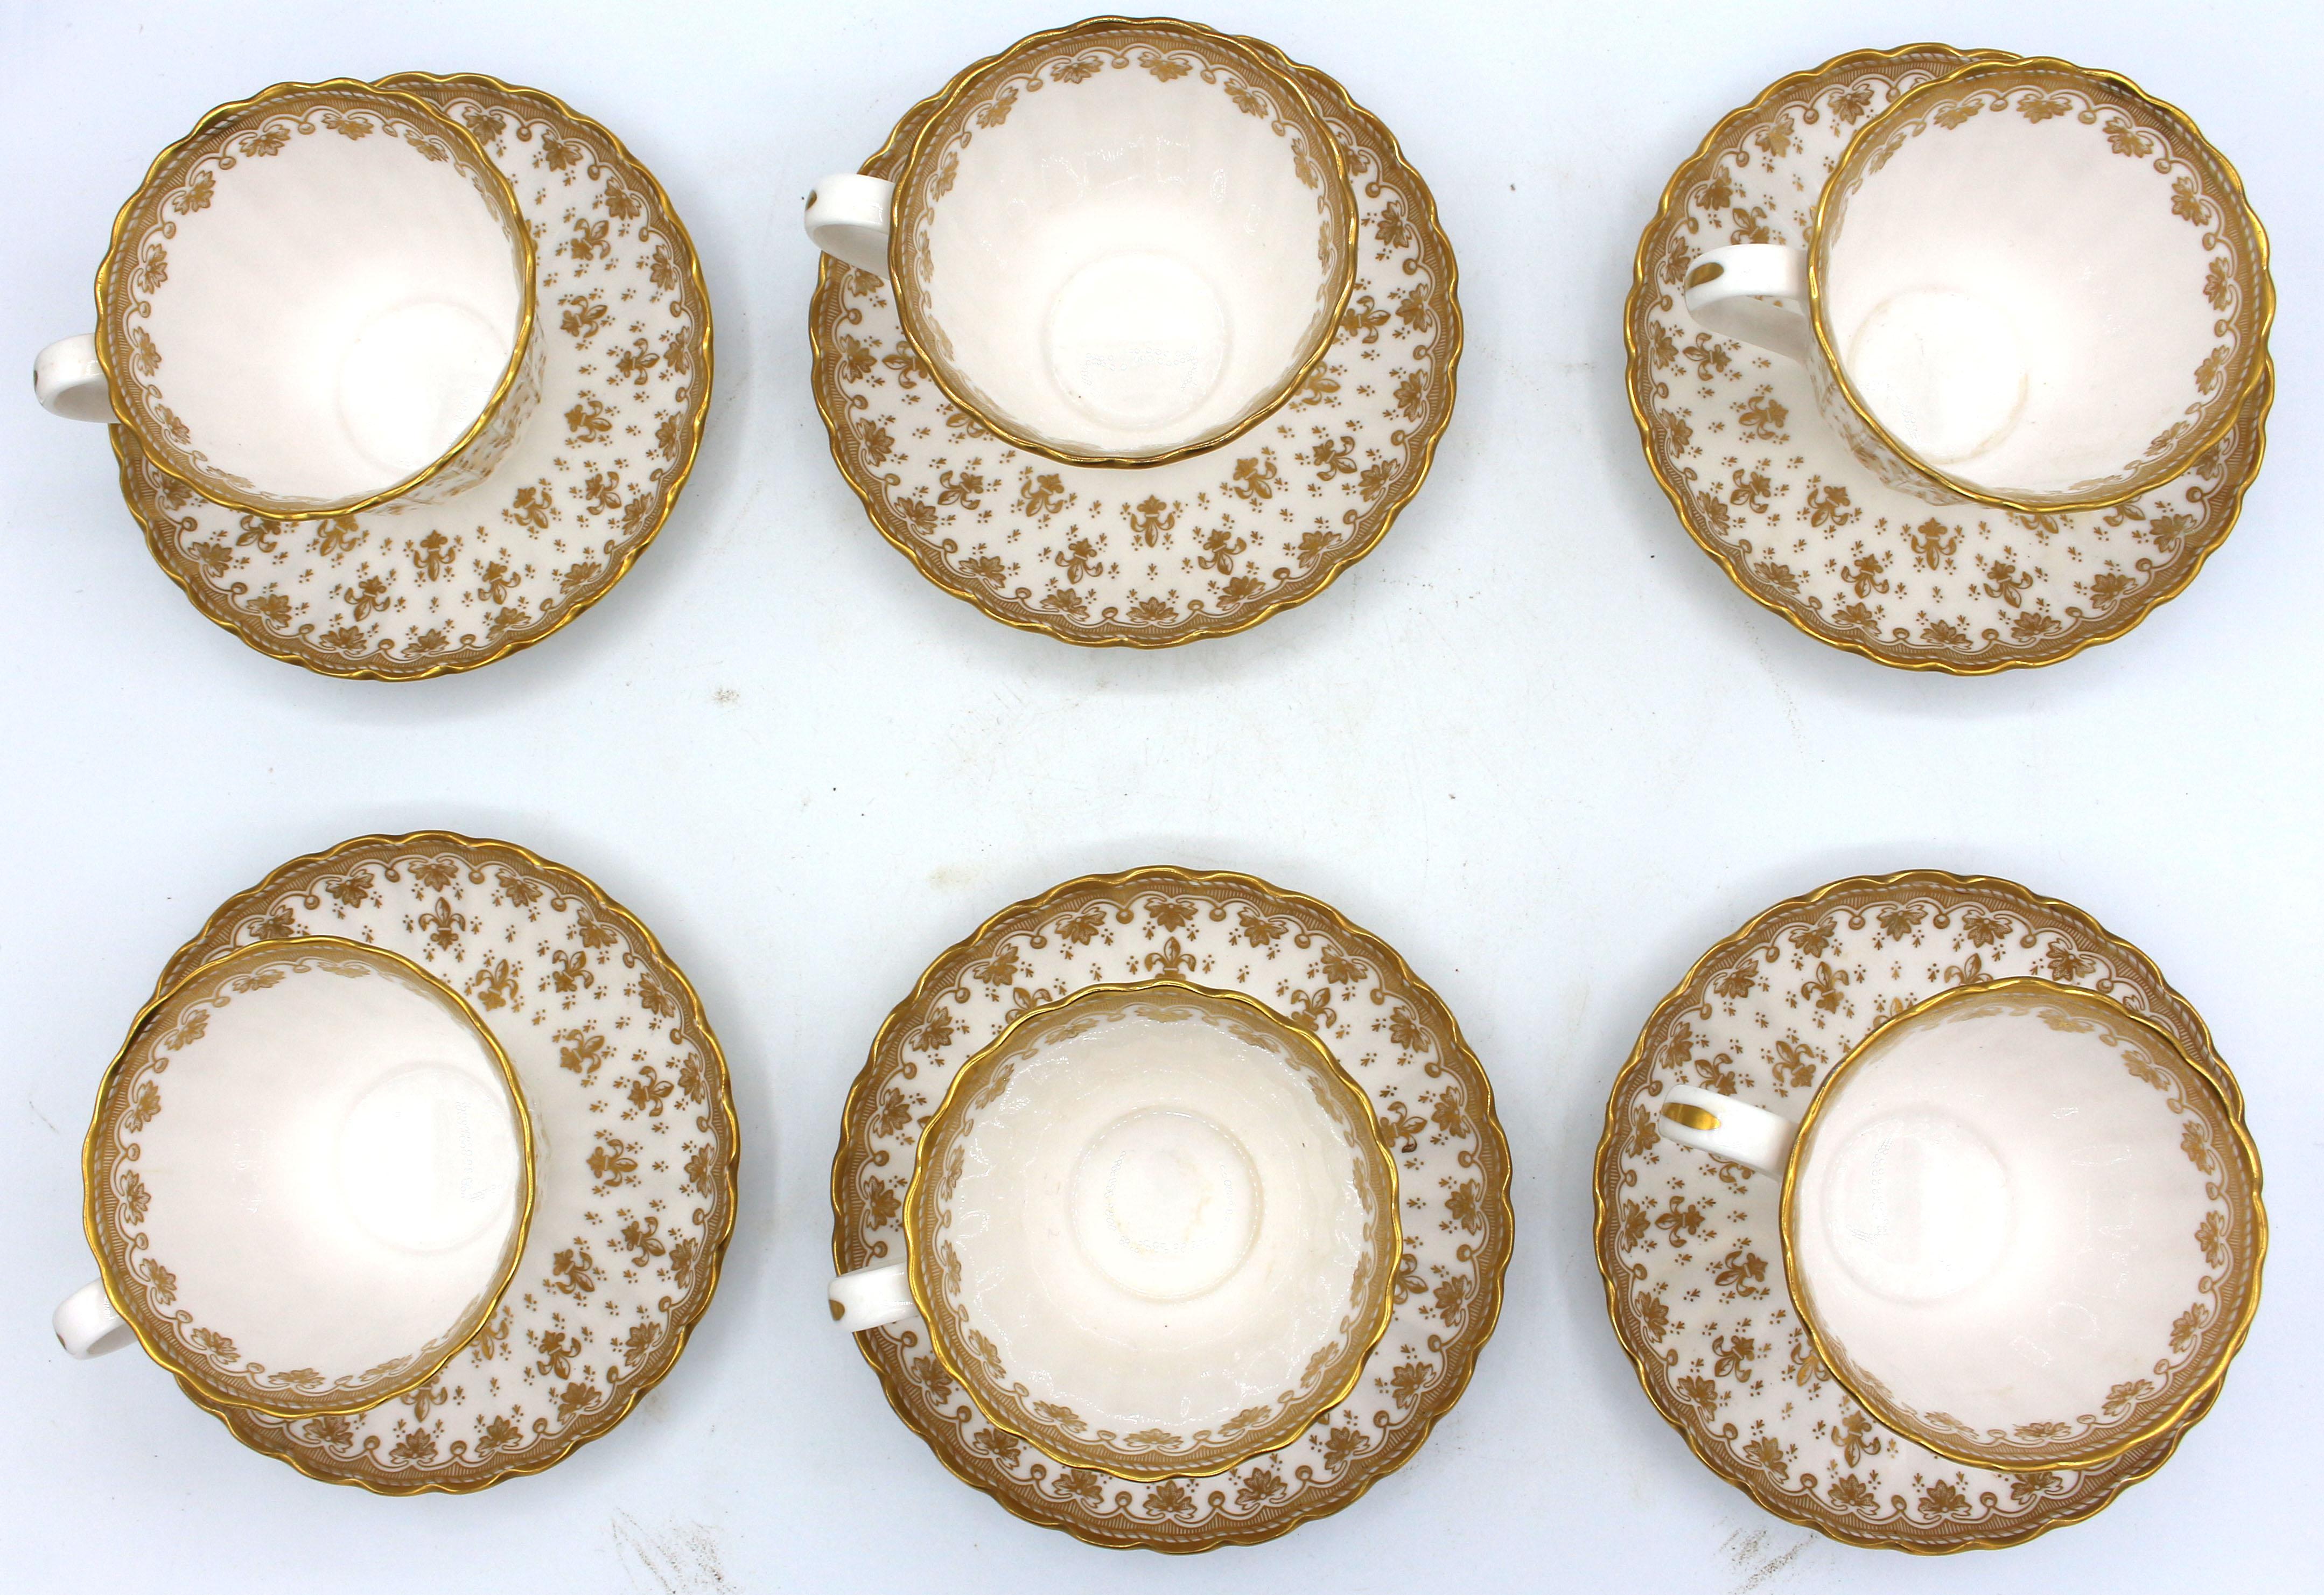 Set of 6 Cups & Saucers, Spode's Fleur de Lys Gold, Mid-20th century, bone china. Fine gilt decoration. Discontinued pattern. Flat with elegantly flared body. Fine condition.
Cup: 2.75